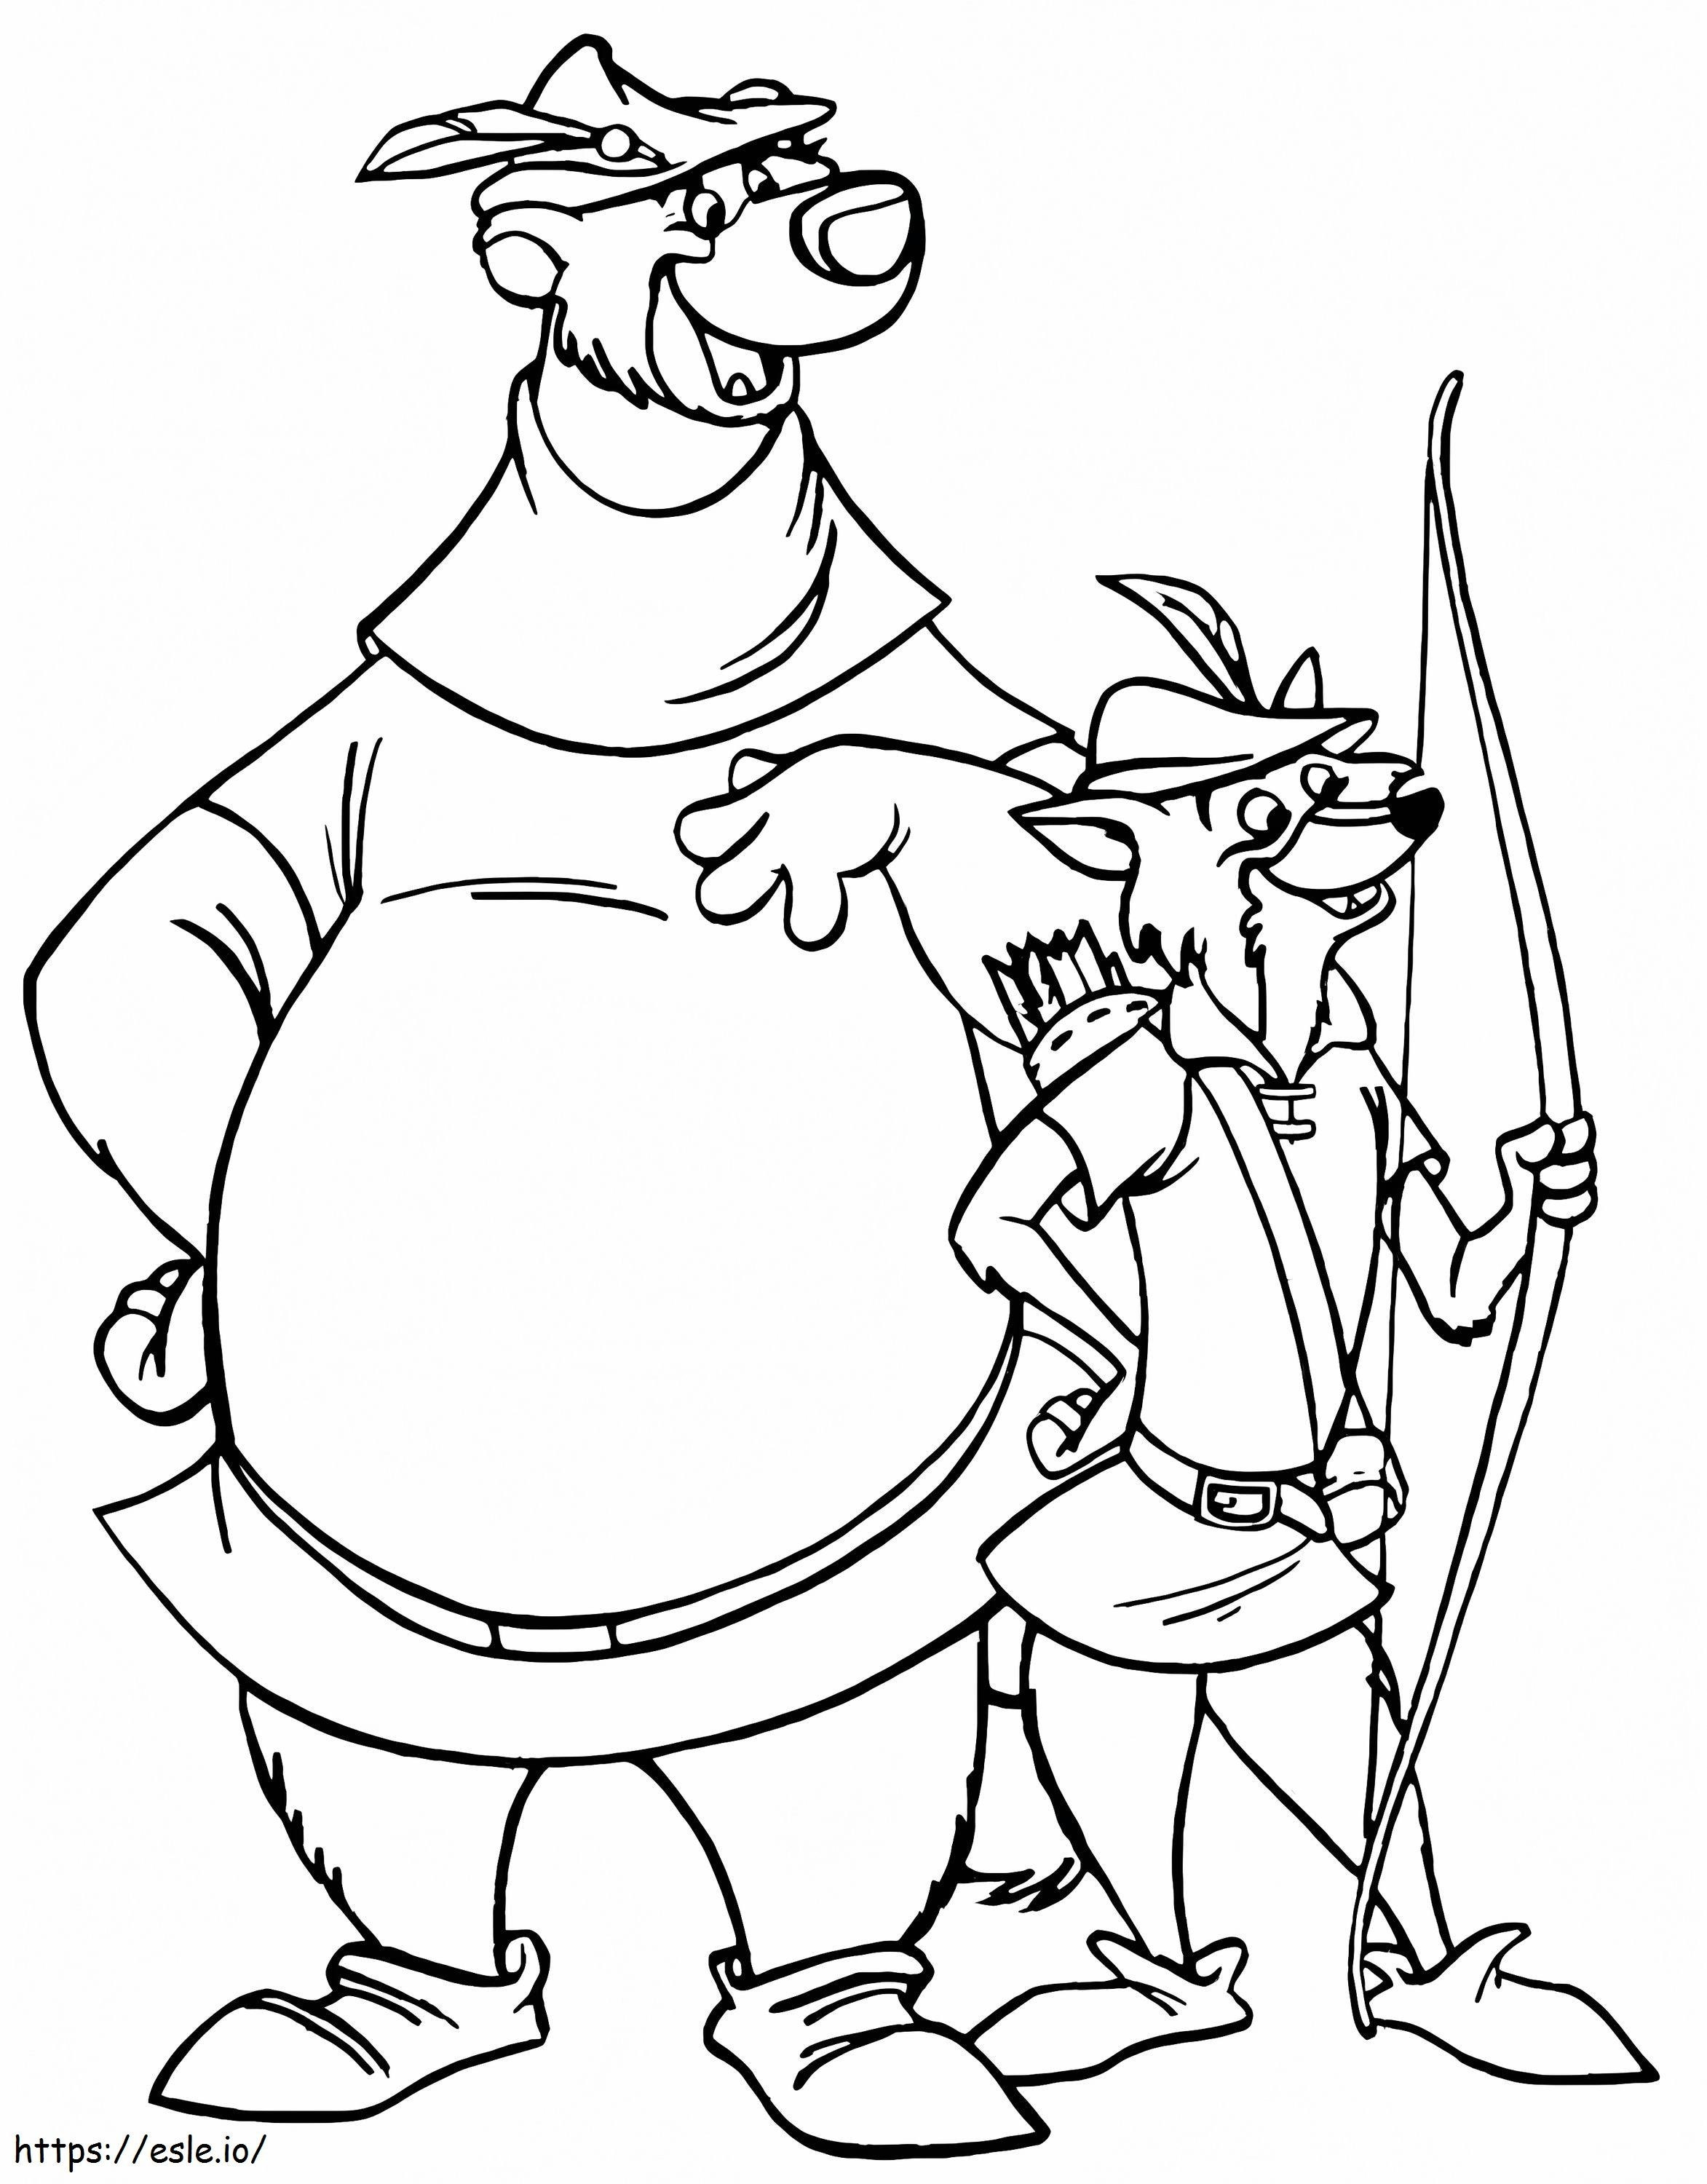 Little Jeans And Robin Hood coloring page